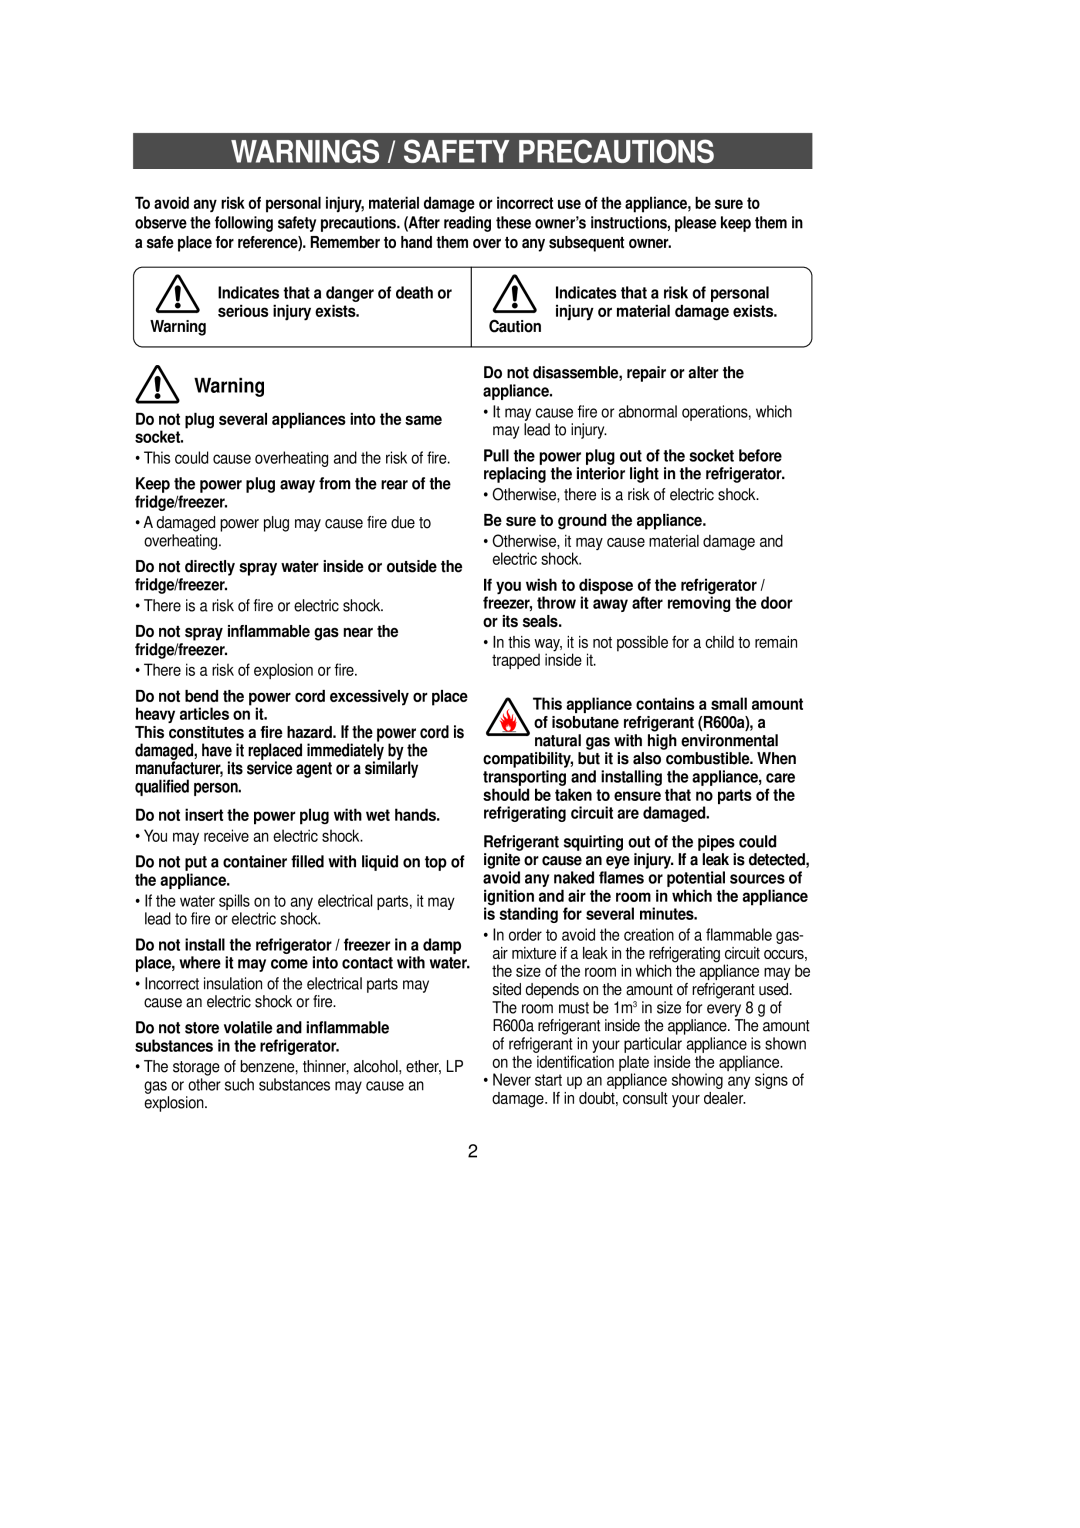 Samsung DA68-01281A Warnings / Safety Precautions, Indicates that a danger of death or, serious injury exists. Warning 